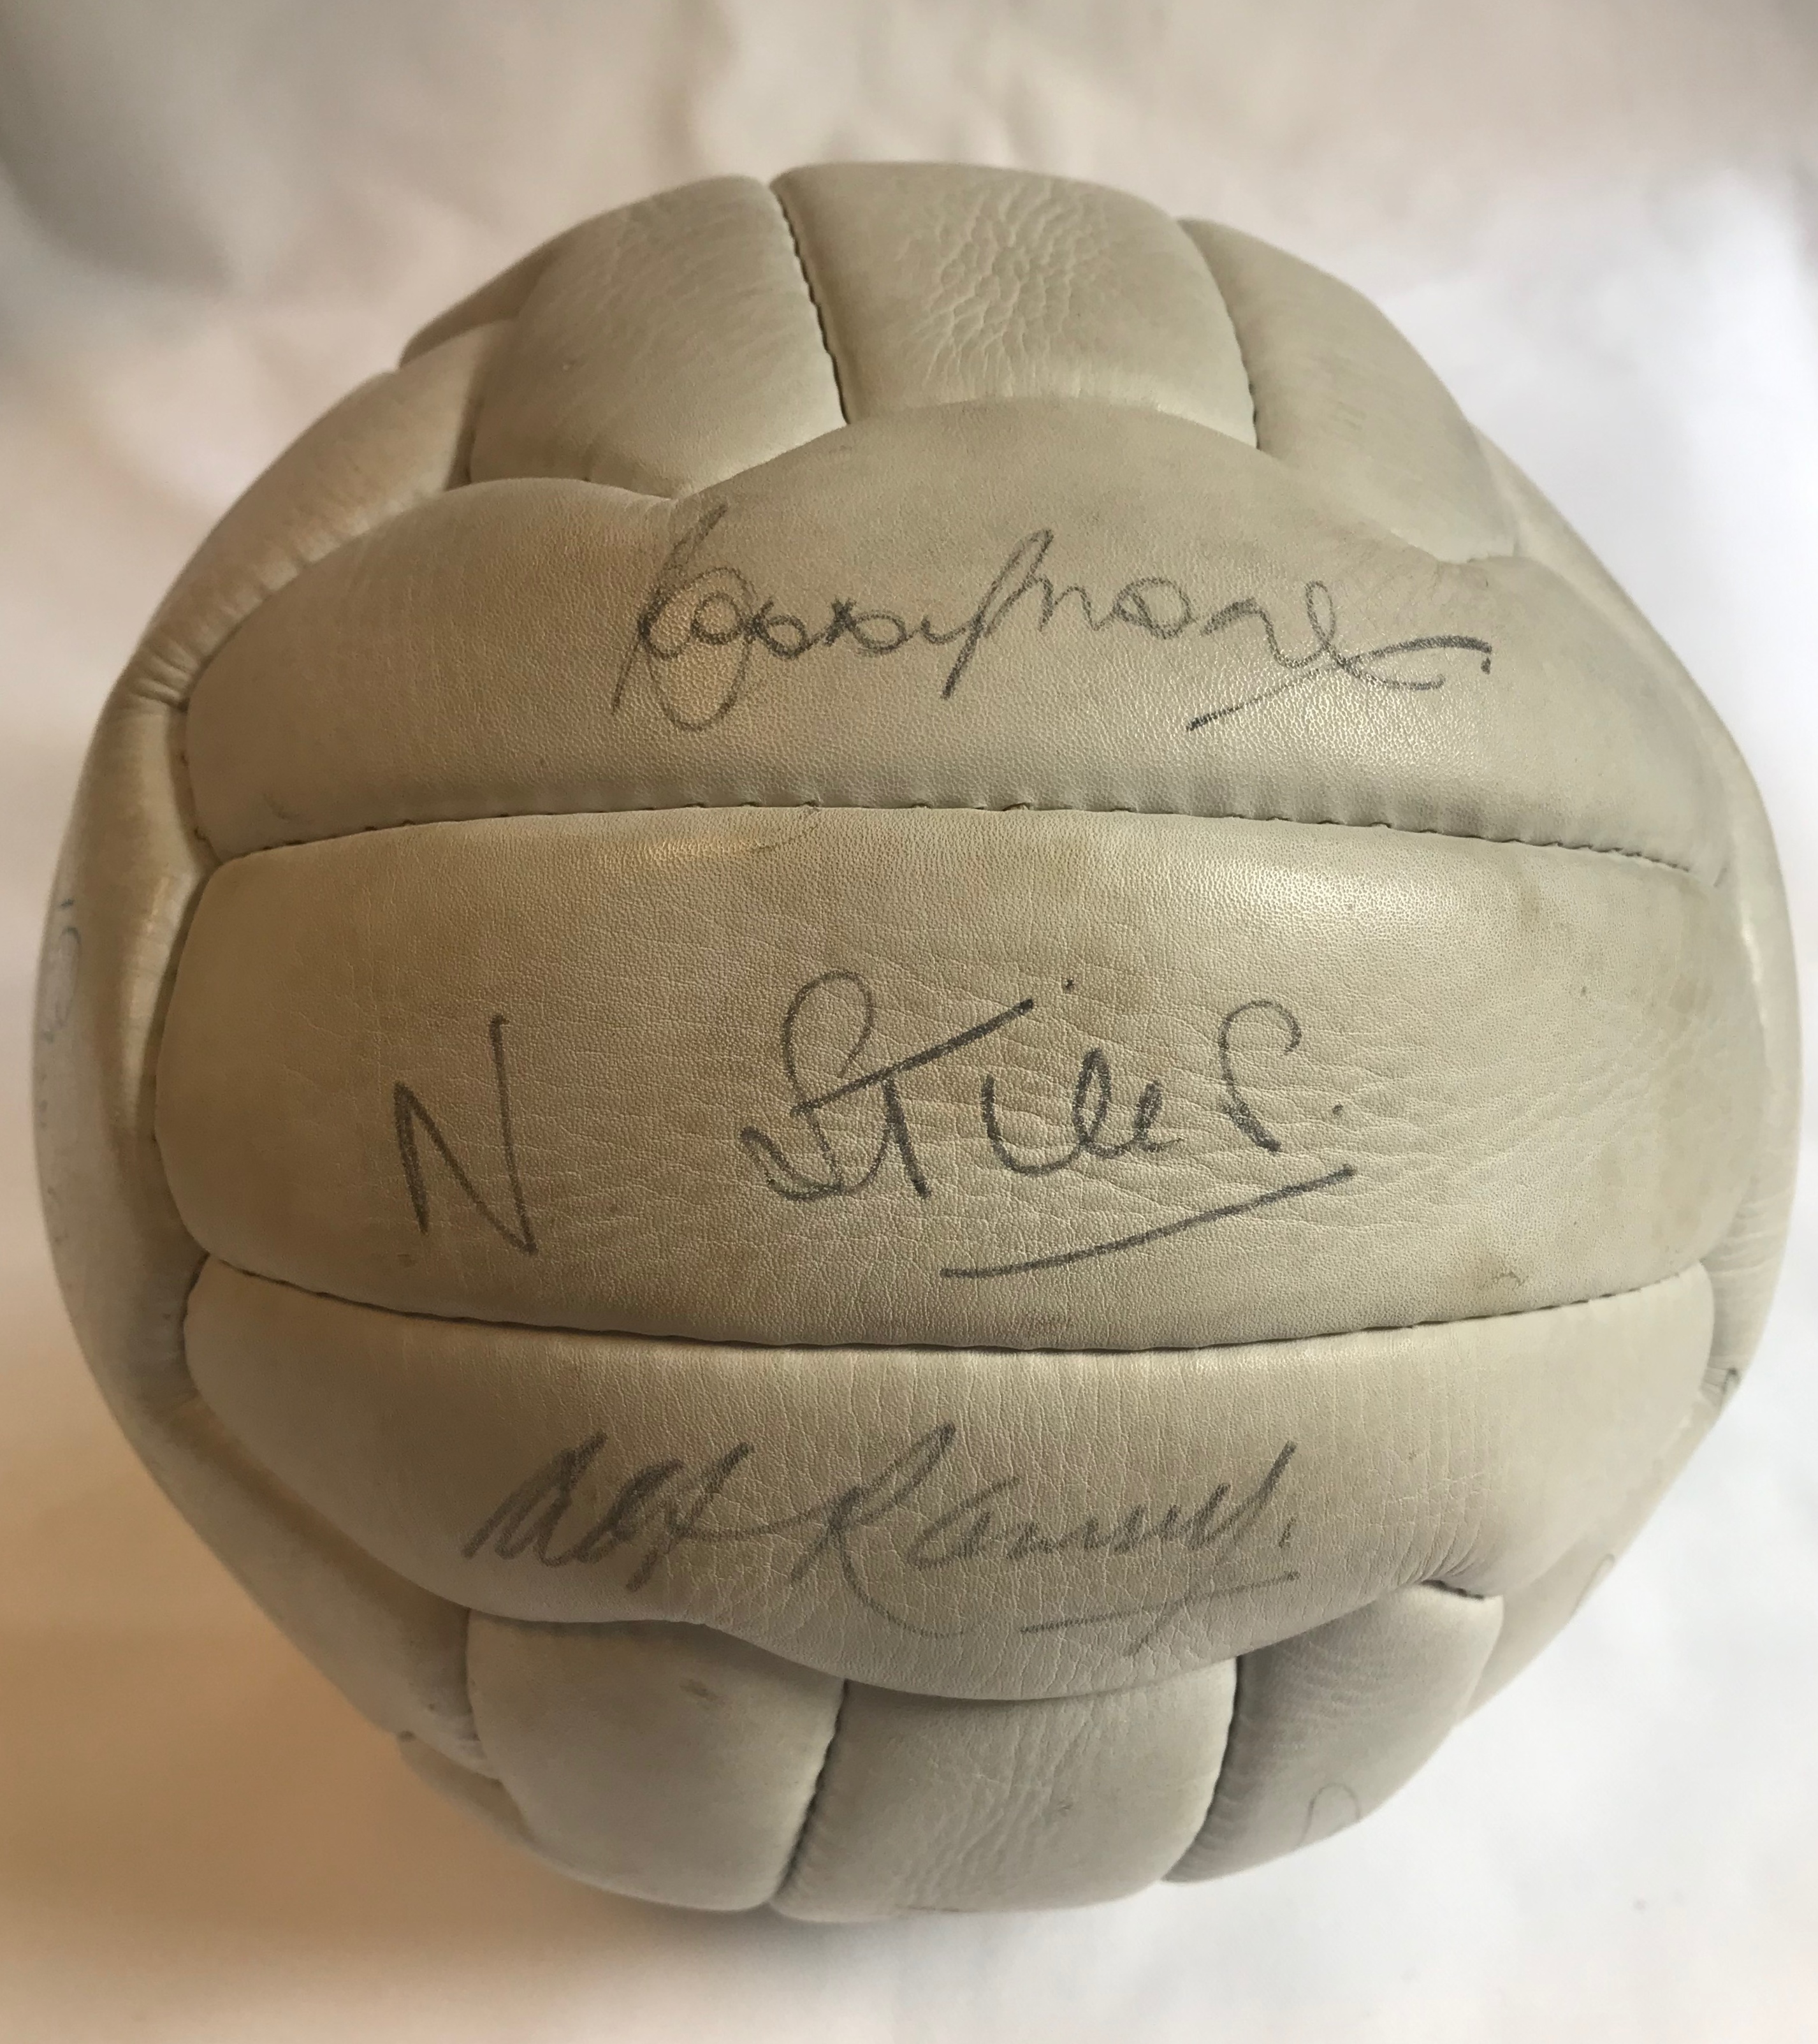 ENGLAND FOOTBALL: A good white leather 'New Excella' football individually signed by fourteen